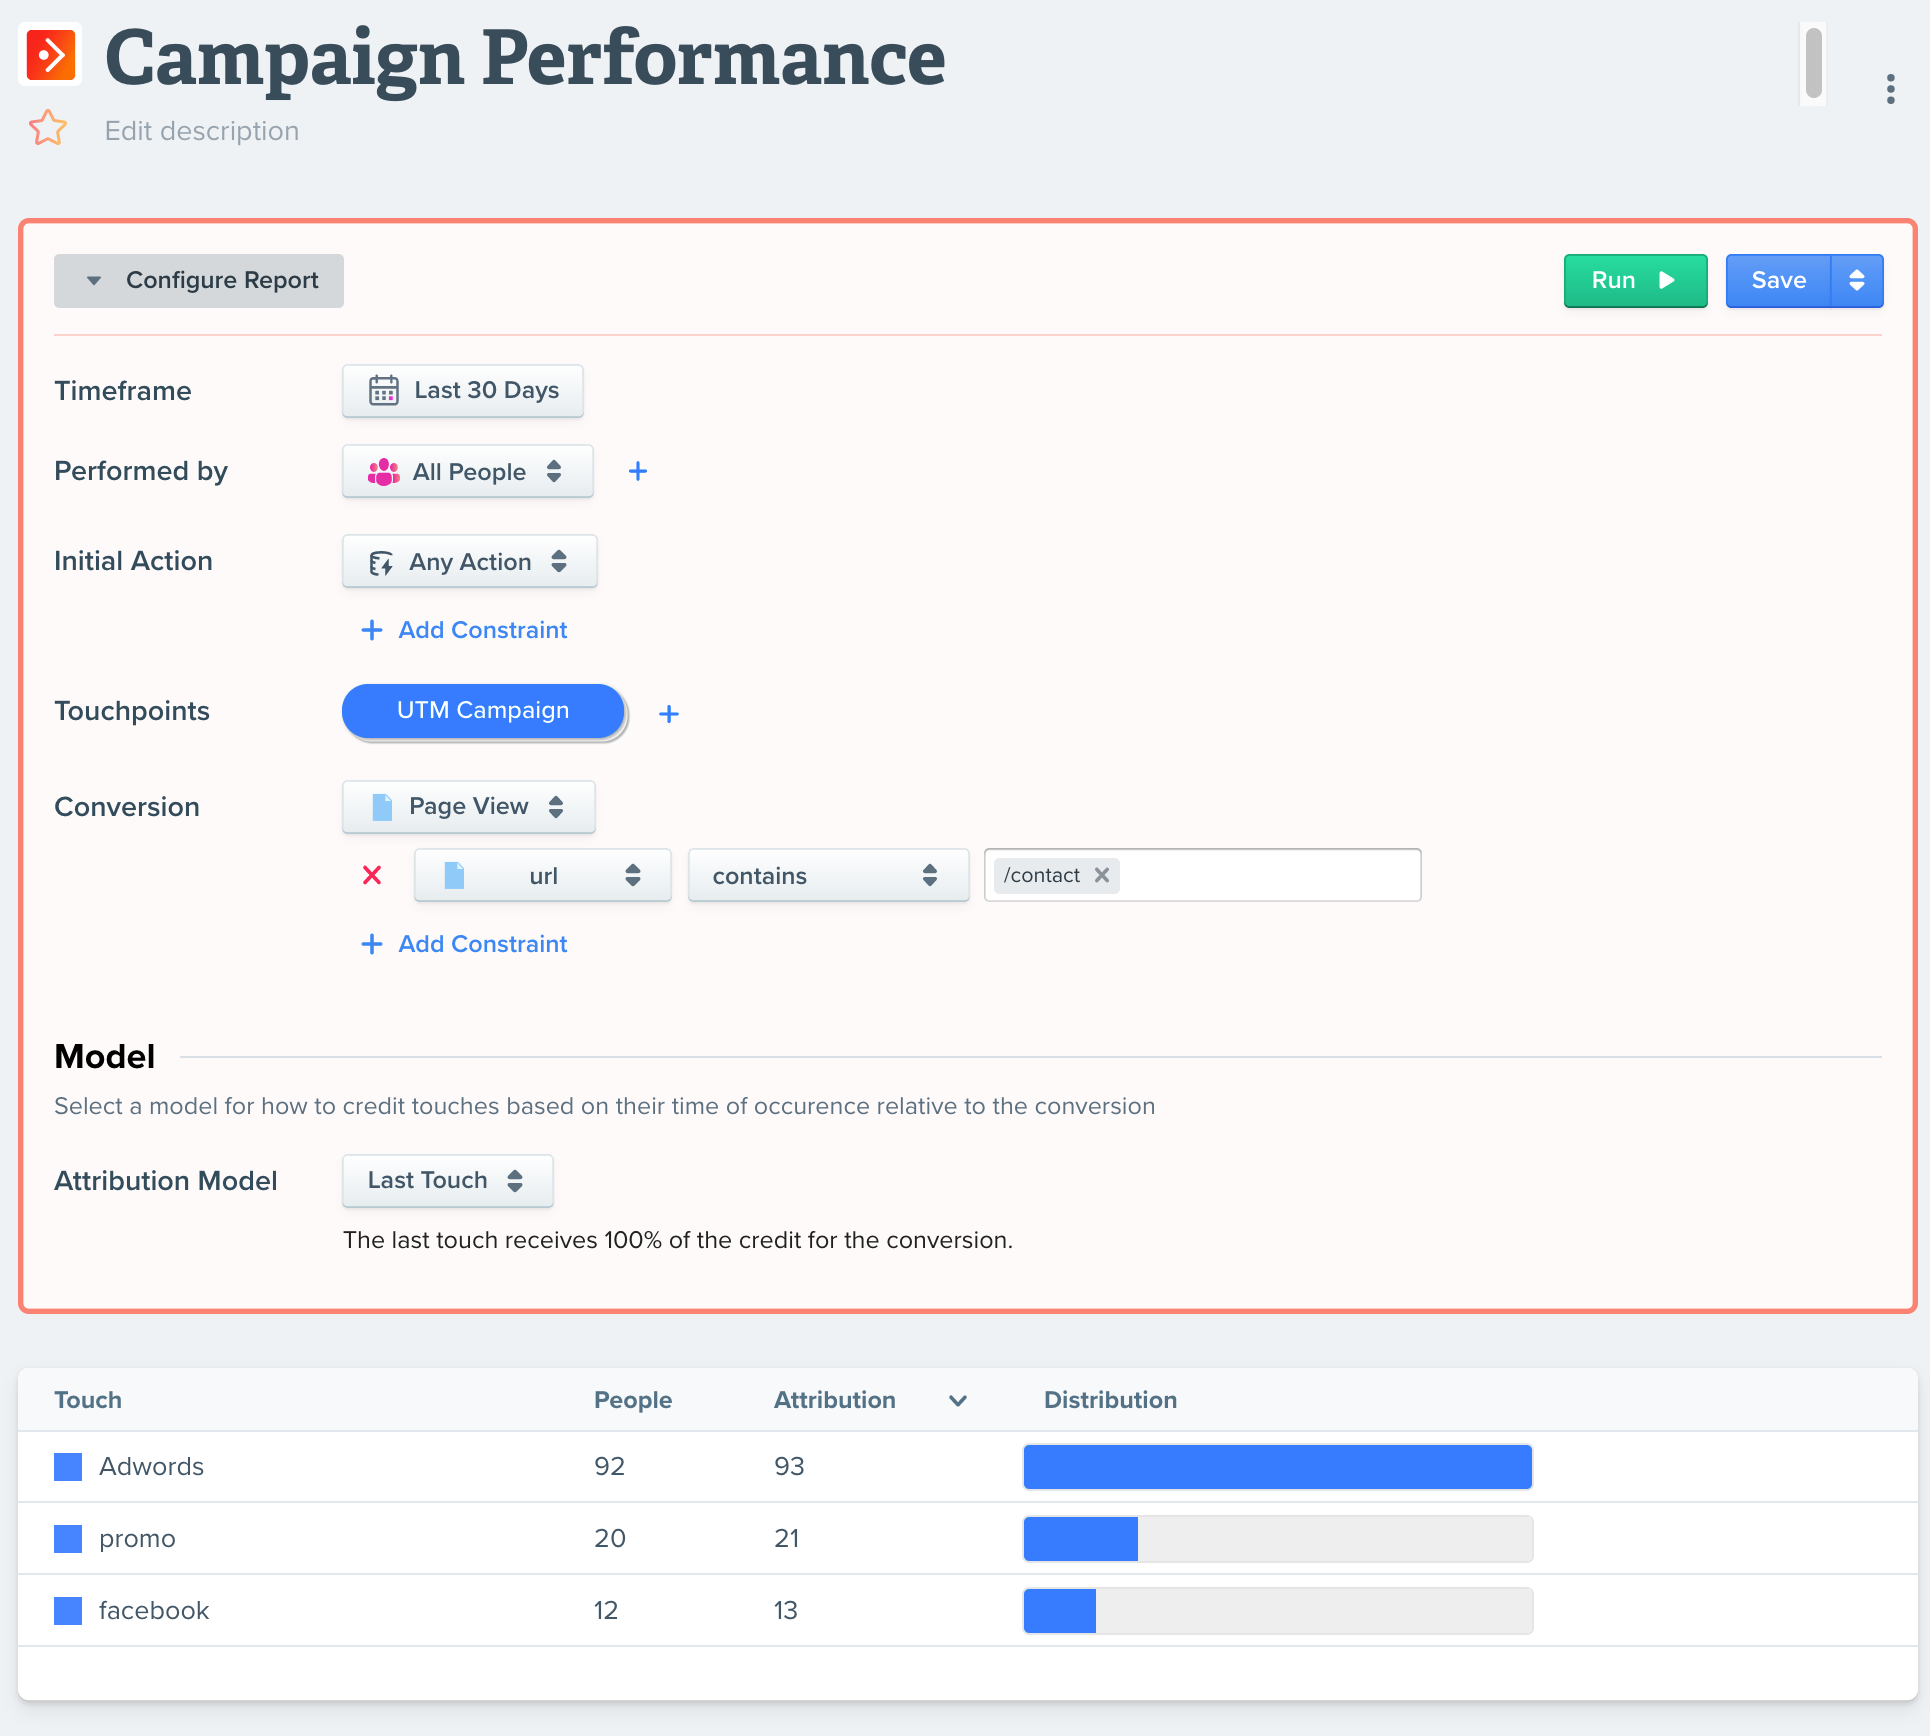 Our final report. We can see in this report that Adwords was the highest performing campaign channel resulting in 92 people converting with 93 conversions (people can convert more than once). If the conversion event was a sum of payments, the attribution would be a total amount attributed to each touch.